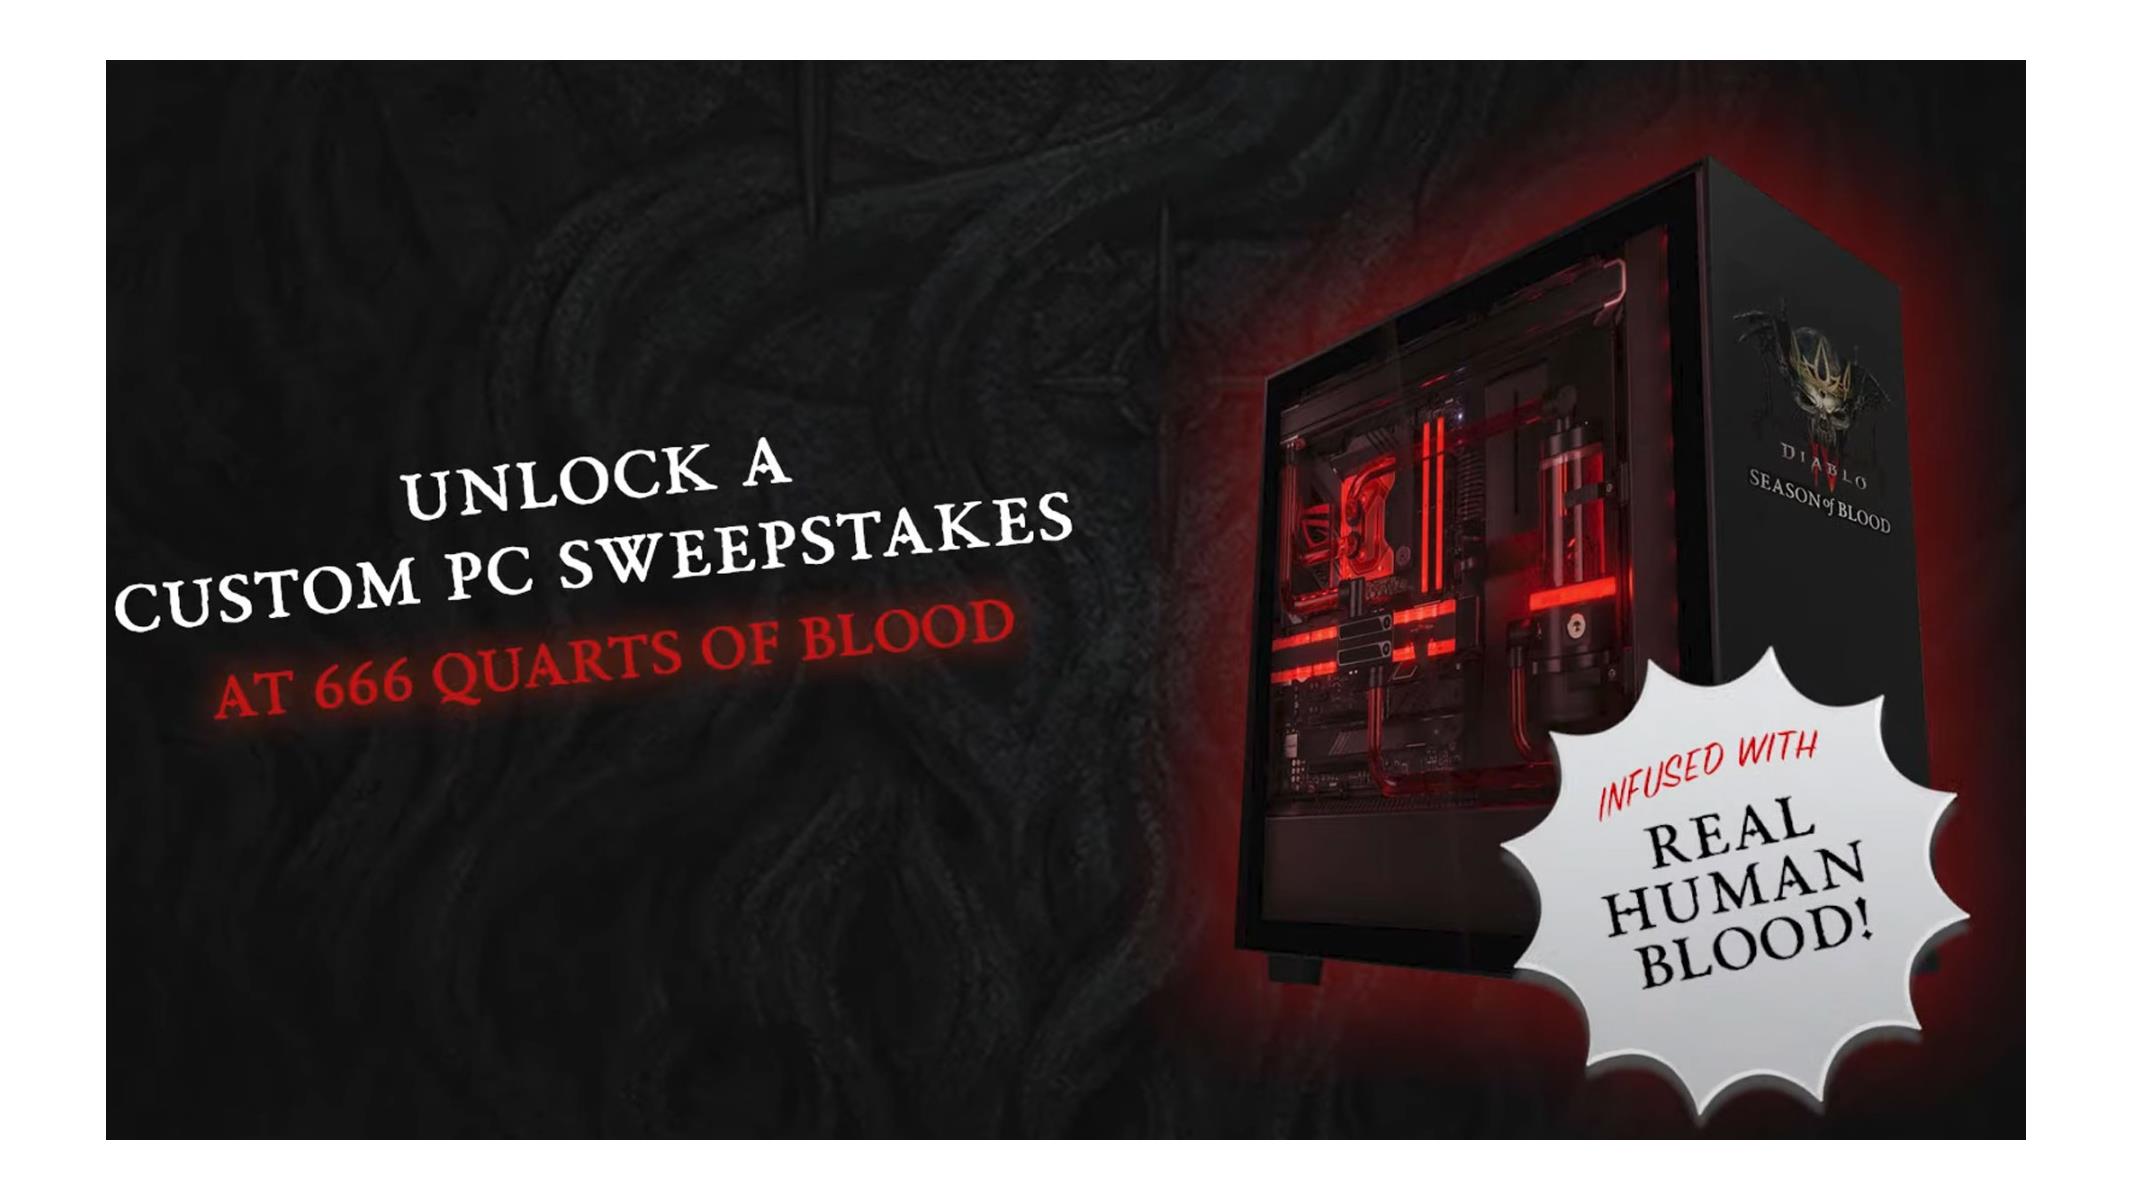 Win a custom Diablo IV PC with human blood if gamers donate 666 quarts